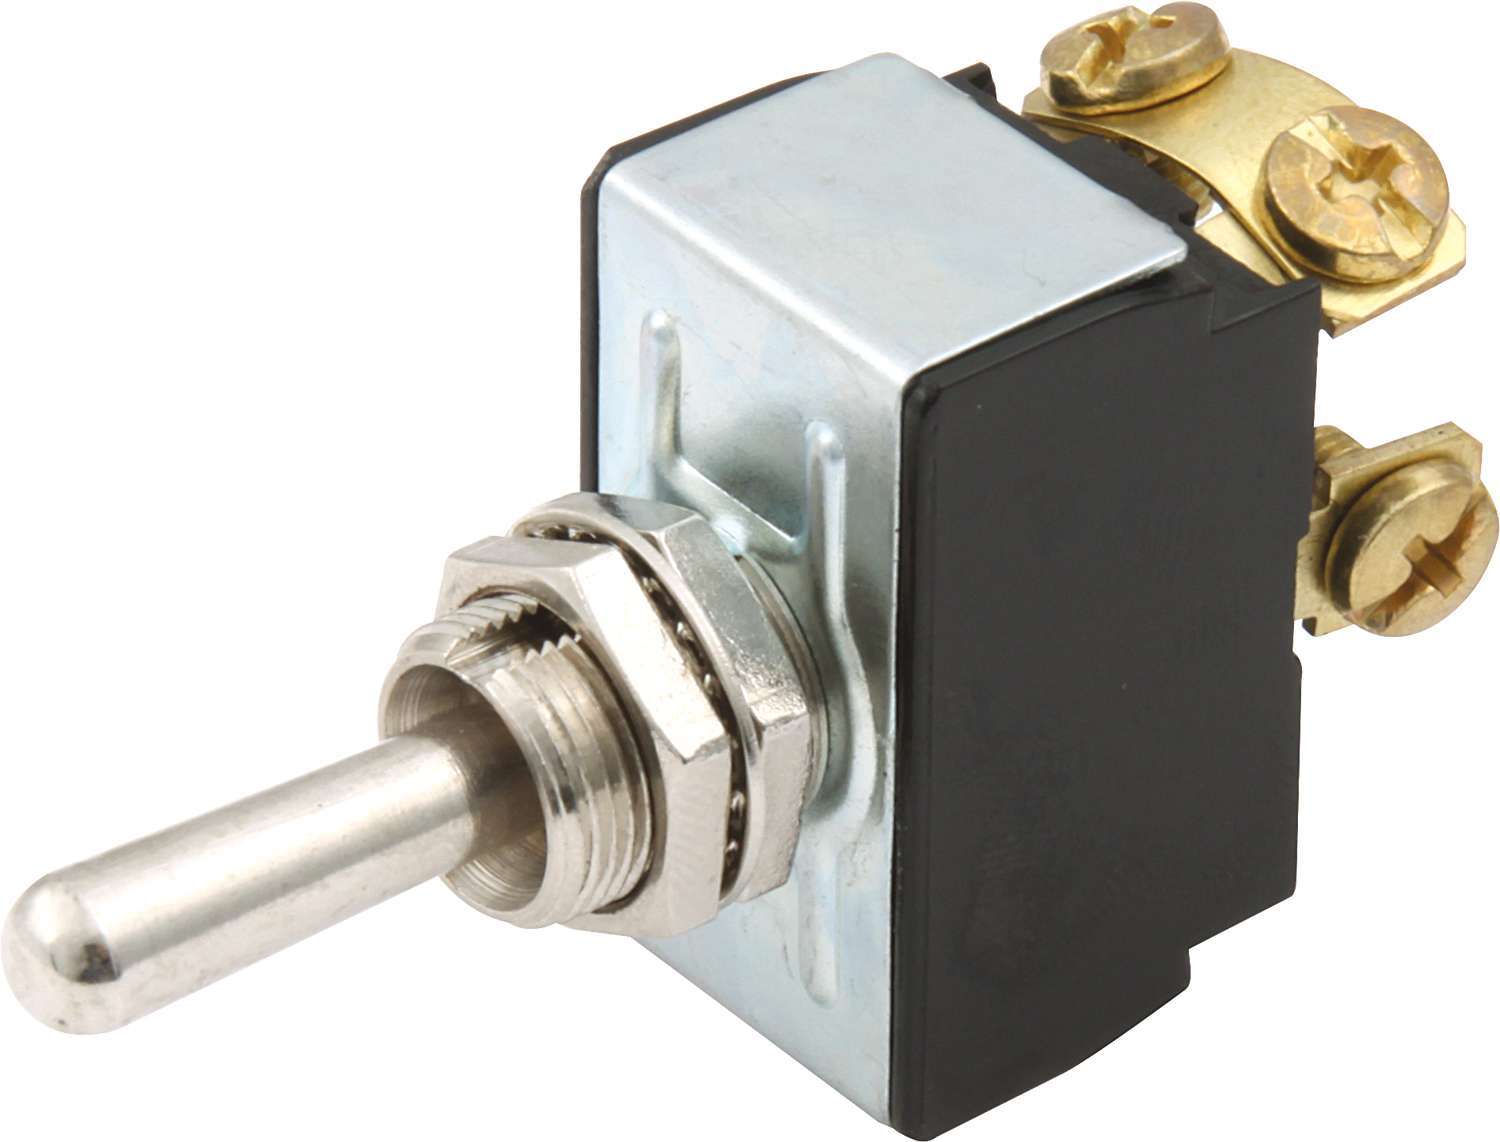 QuickCar 50-506 Toggle Switch, Ignition / Start, Off / On / Momentary, Single Pole, 25 amp, 12V, Each